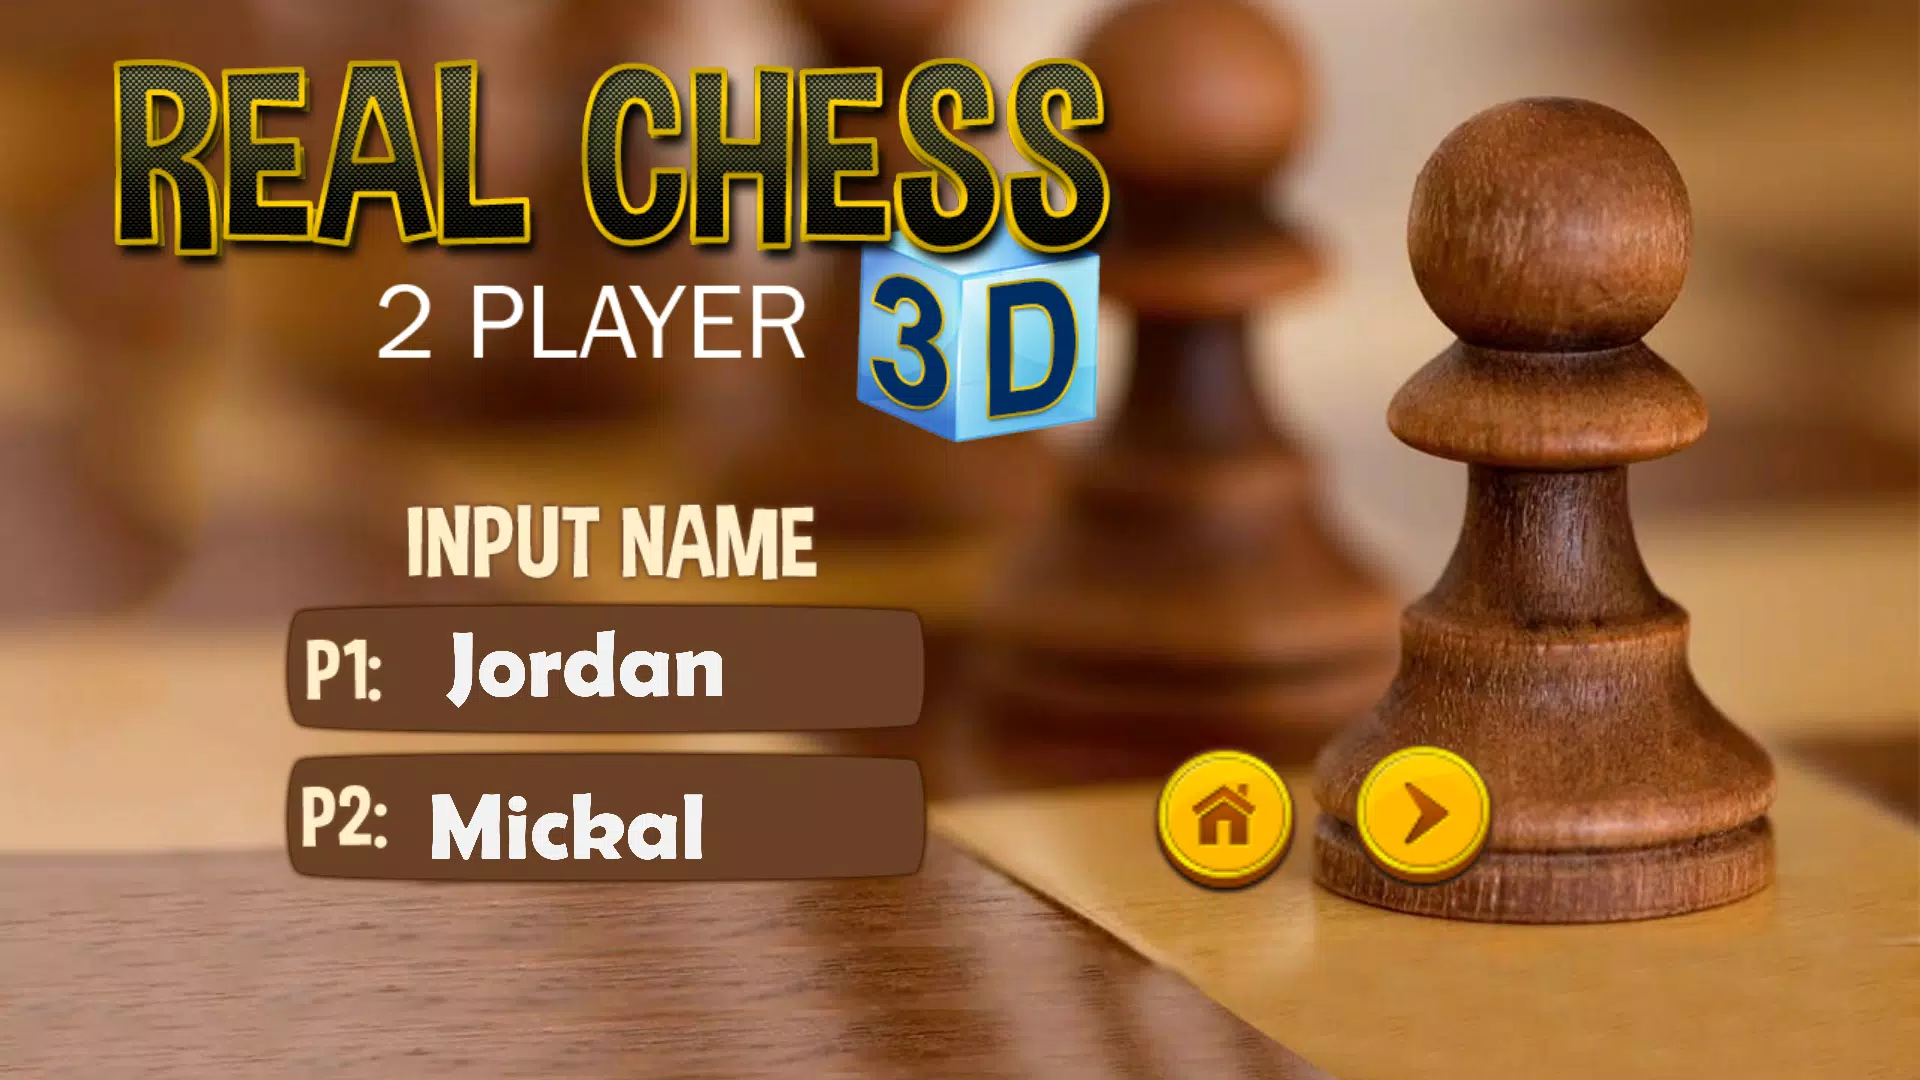 Senior Chess Apk Download for Android- Latest version 2.32-  leen.ammeraal.chess